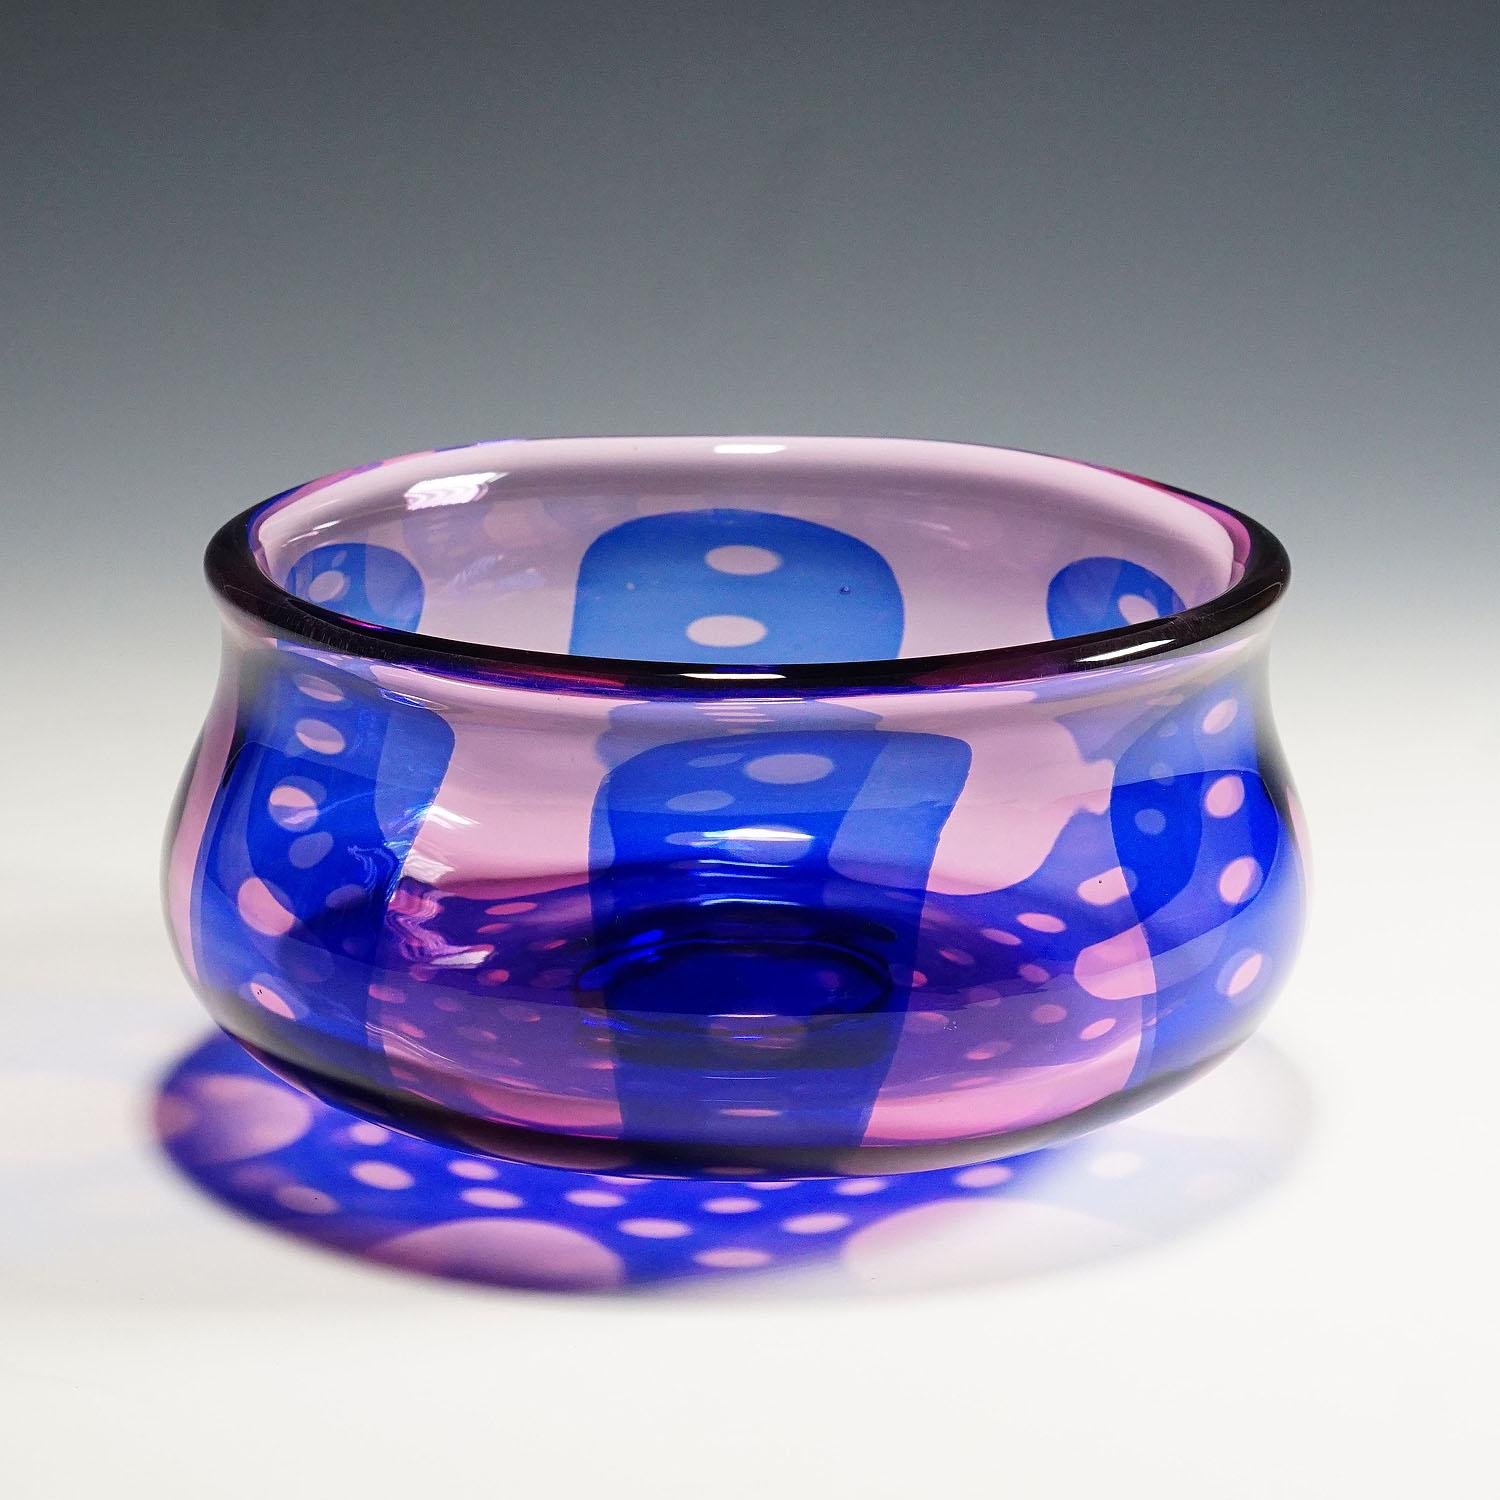 Vintage Graal Bowl by Edward Hald for Orrefors, Sweden ca. 1970s

A large and heavy bowl of the Graal series designed by Edvward Hald for Orrefors Sweden. Pink glass decorated with a dotted layer in blue, overlayed with a thick clear glass layer.